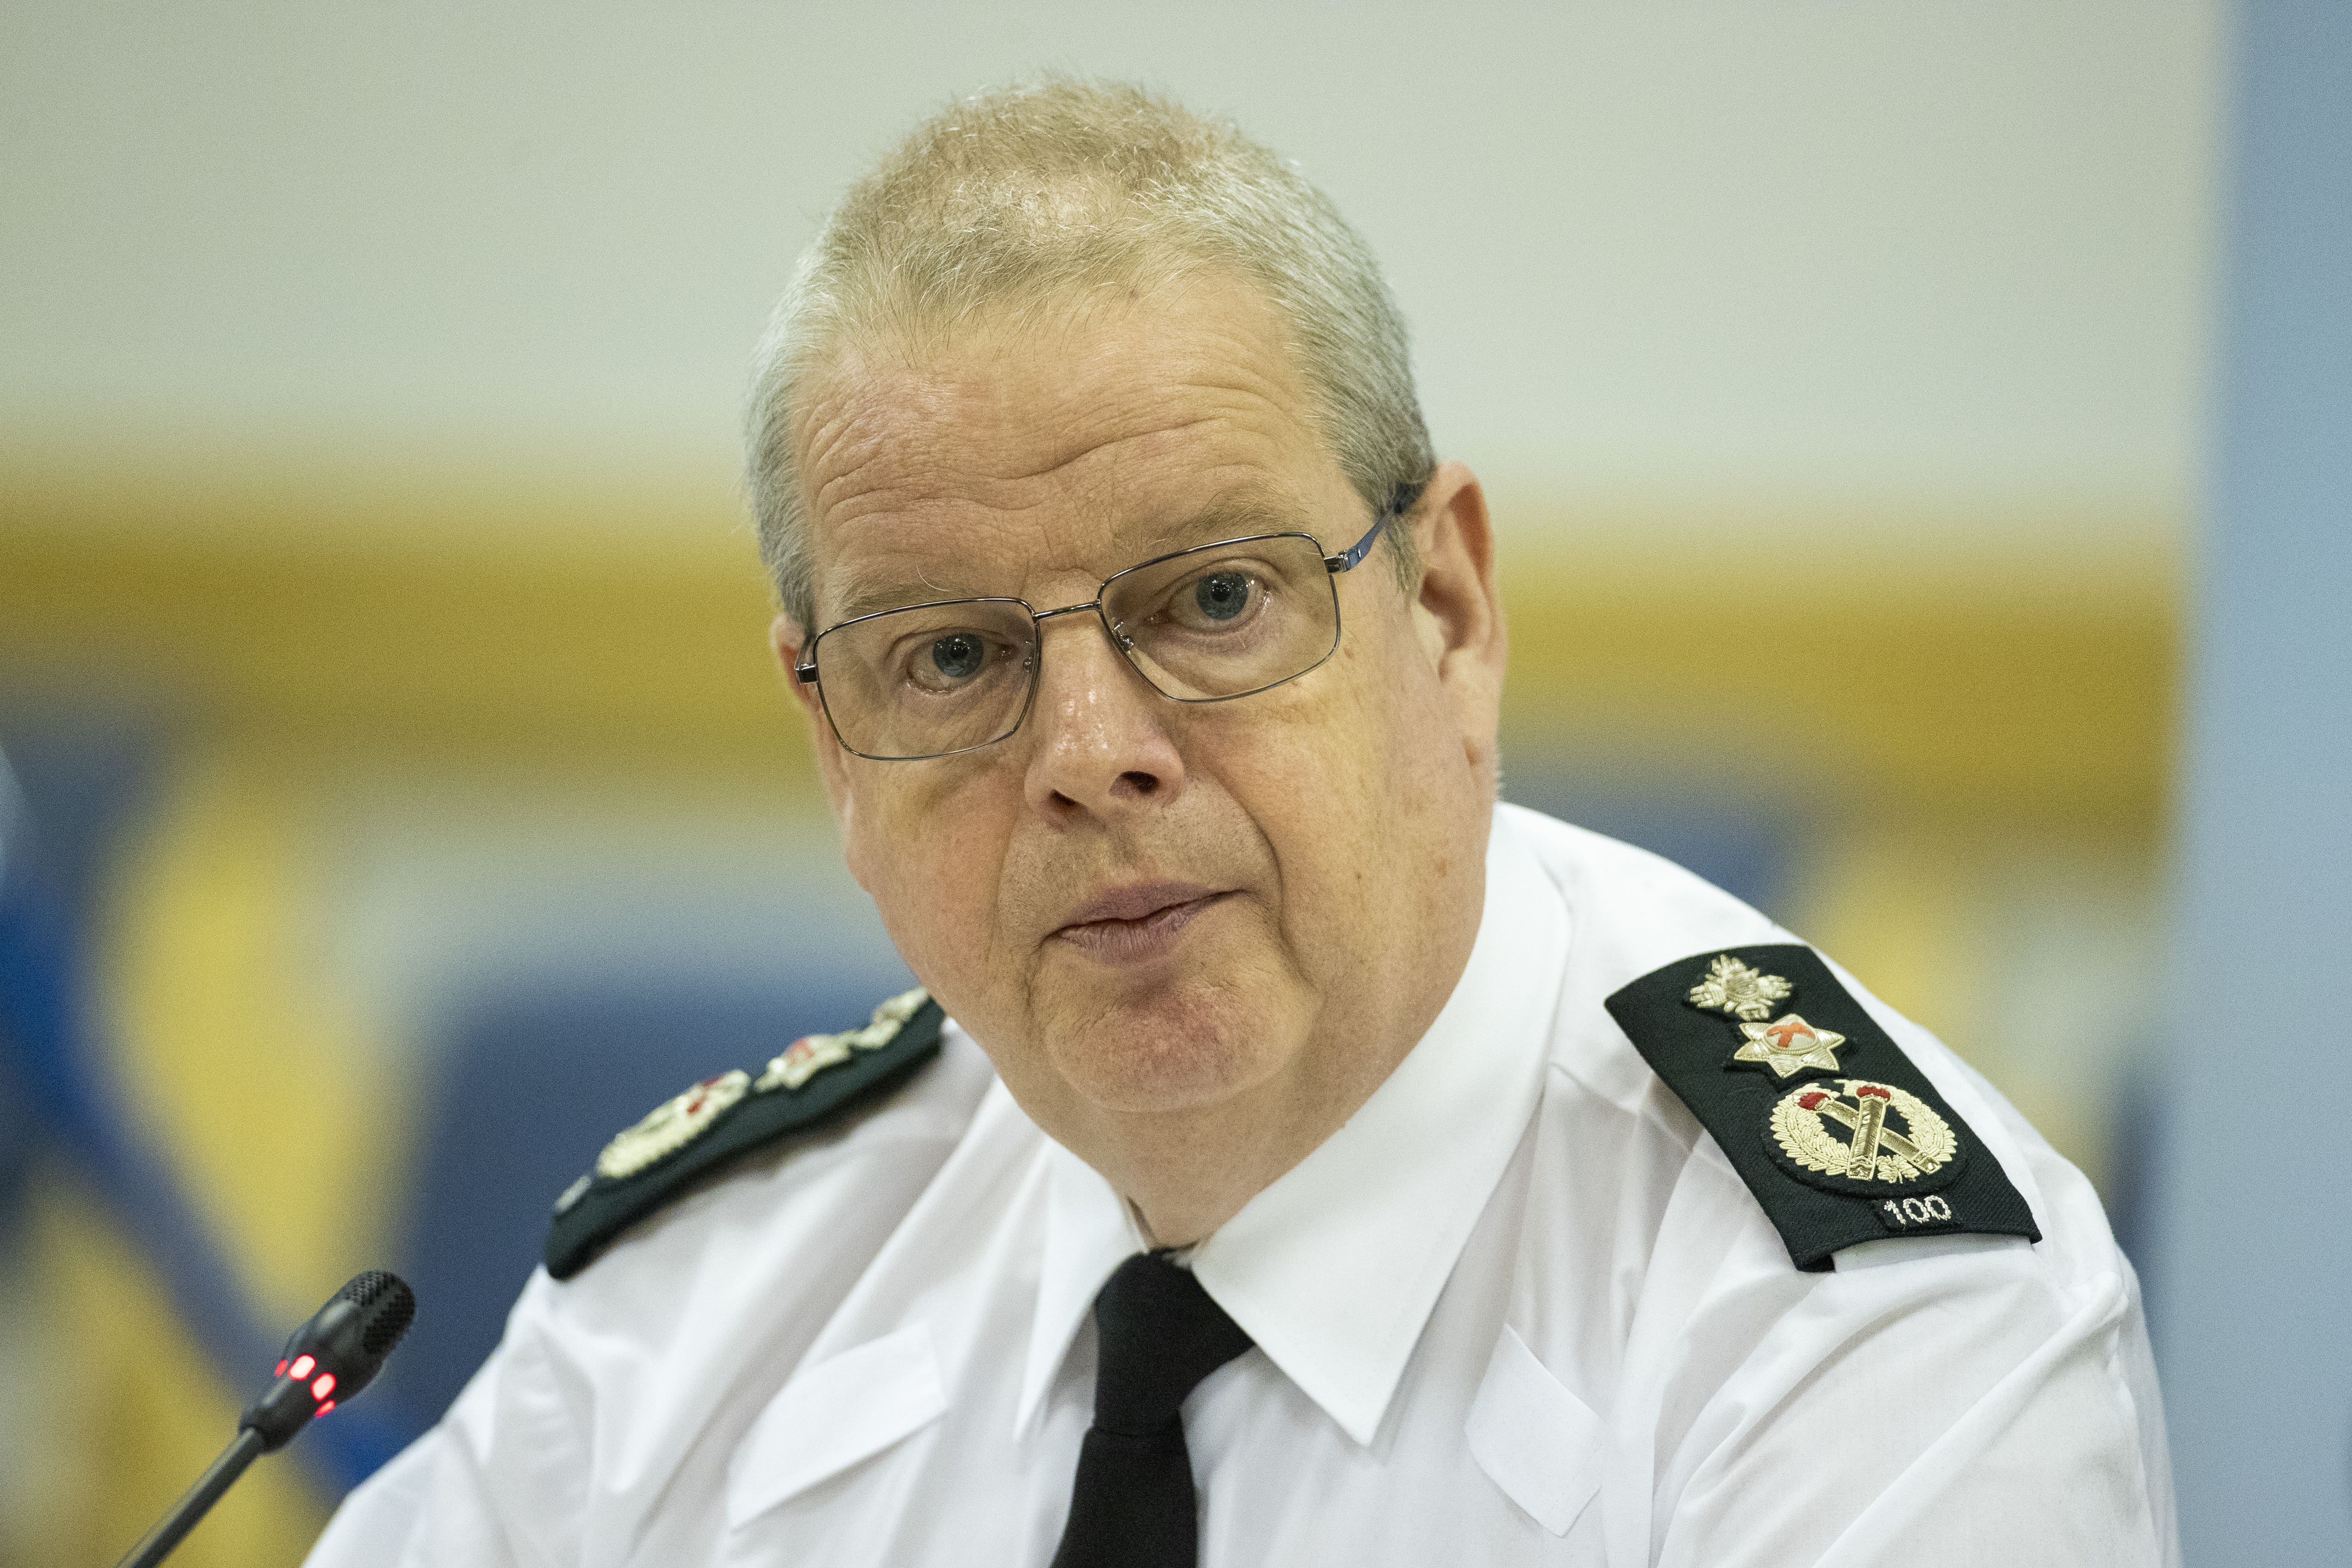 Chief Constable Simon Byrne speaks during the Northern Ireland Policing Board meeting at Clarendon Road in Belfast (Liam McBurney/PA)